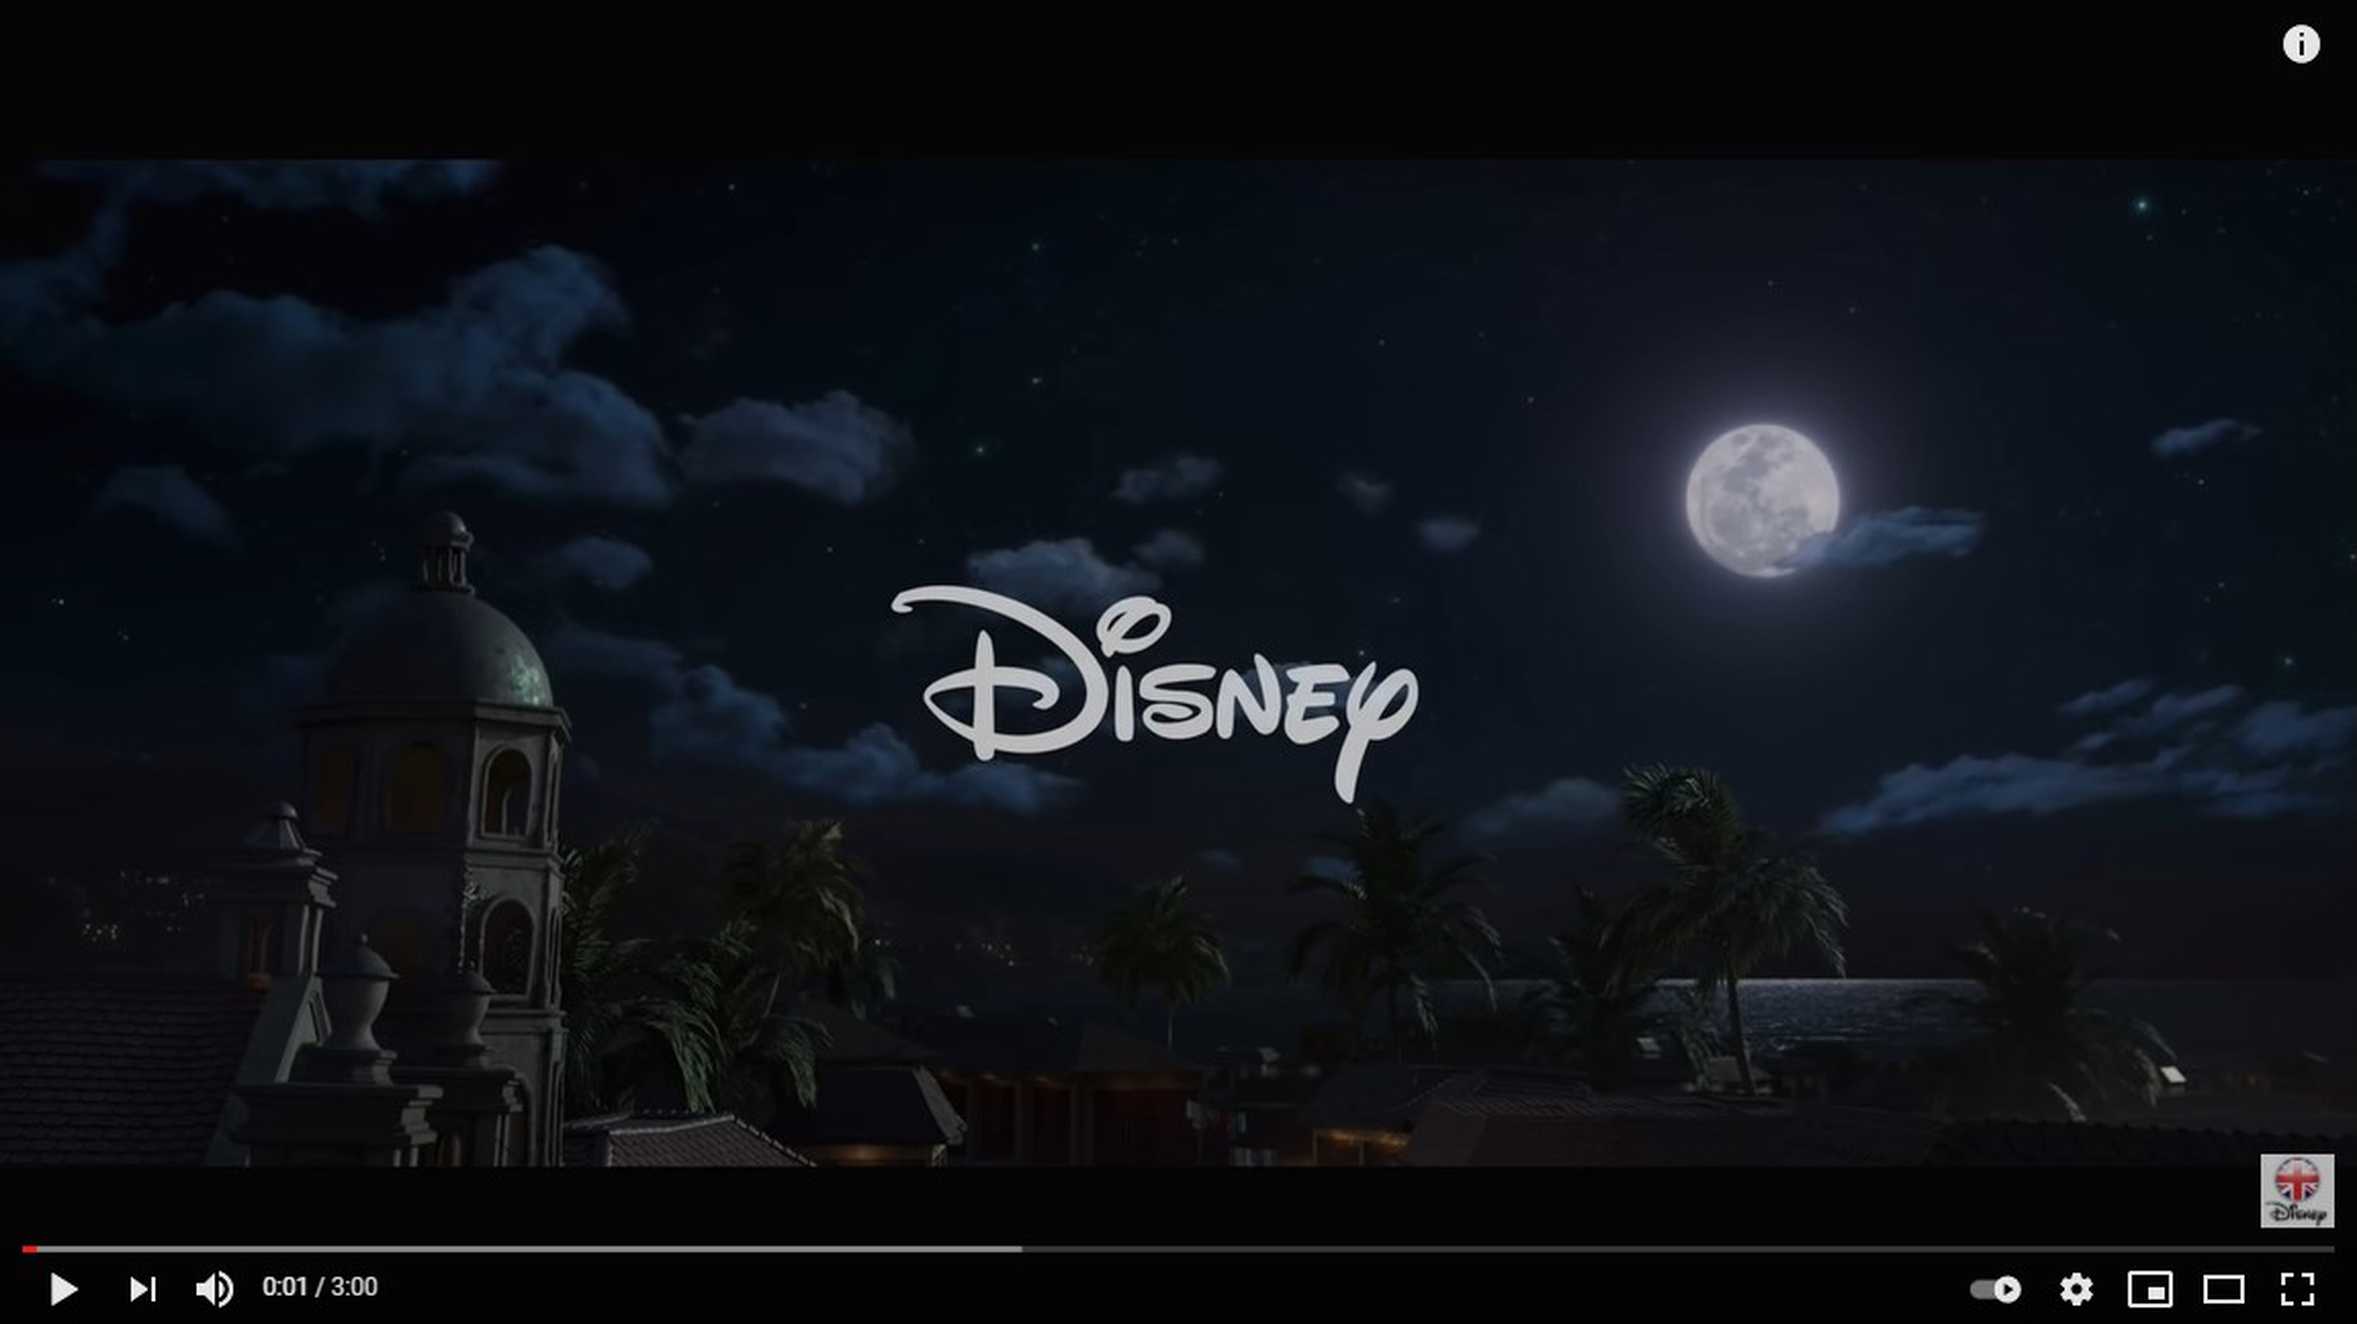 The opening frame of Disney's Christmas advert.